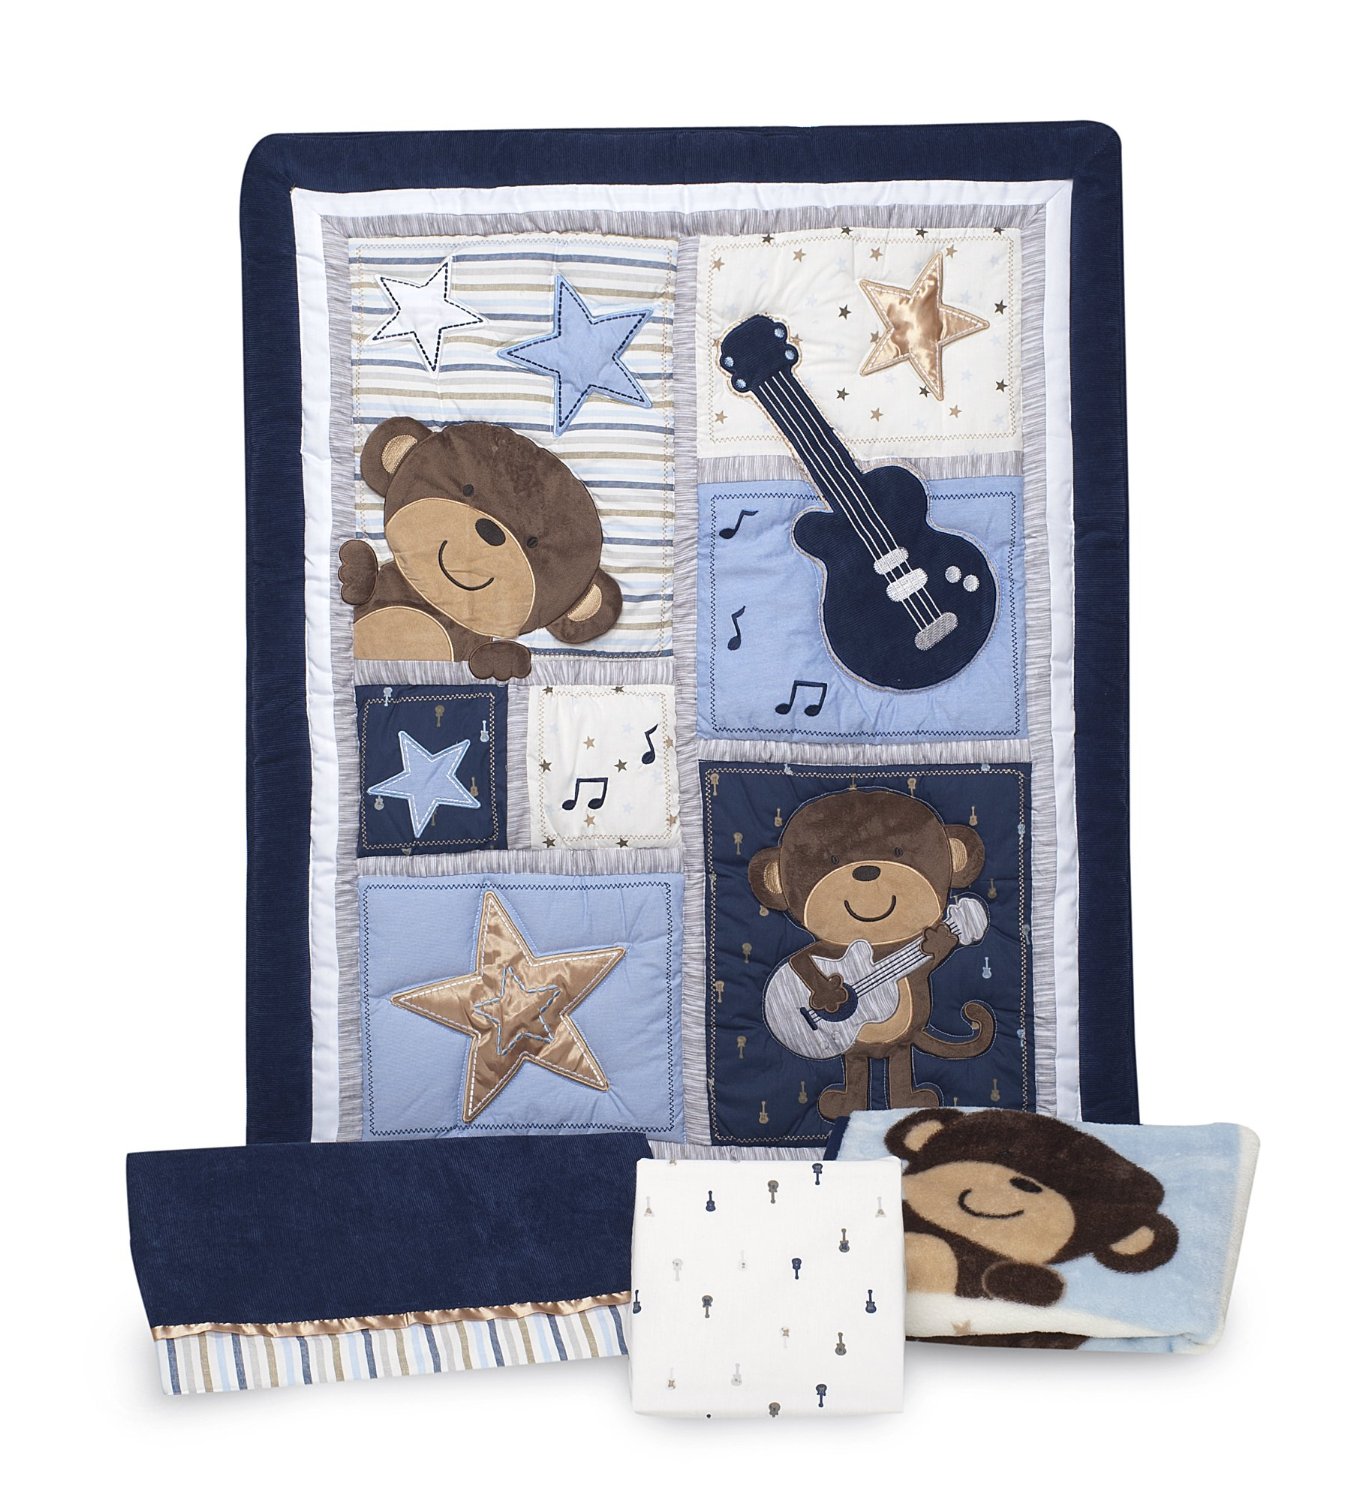 Carters Monkey Rockstar Baby Bedding Baby Bedding and Accessories